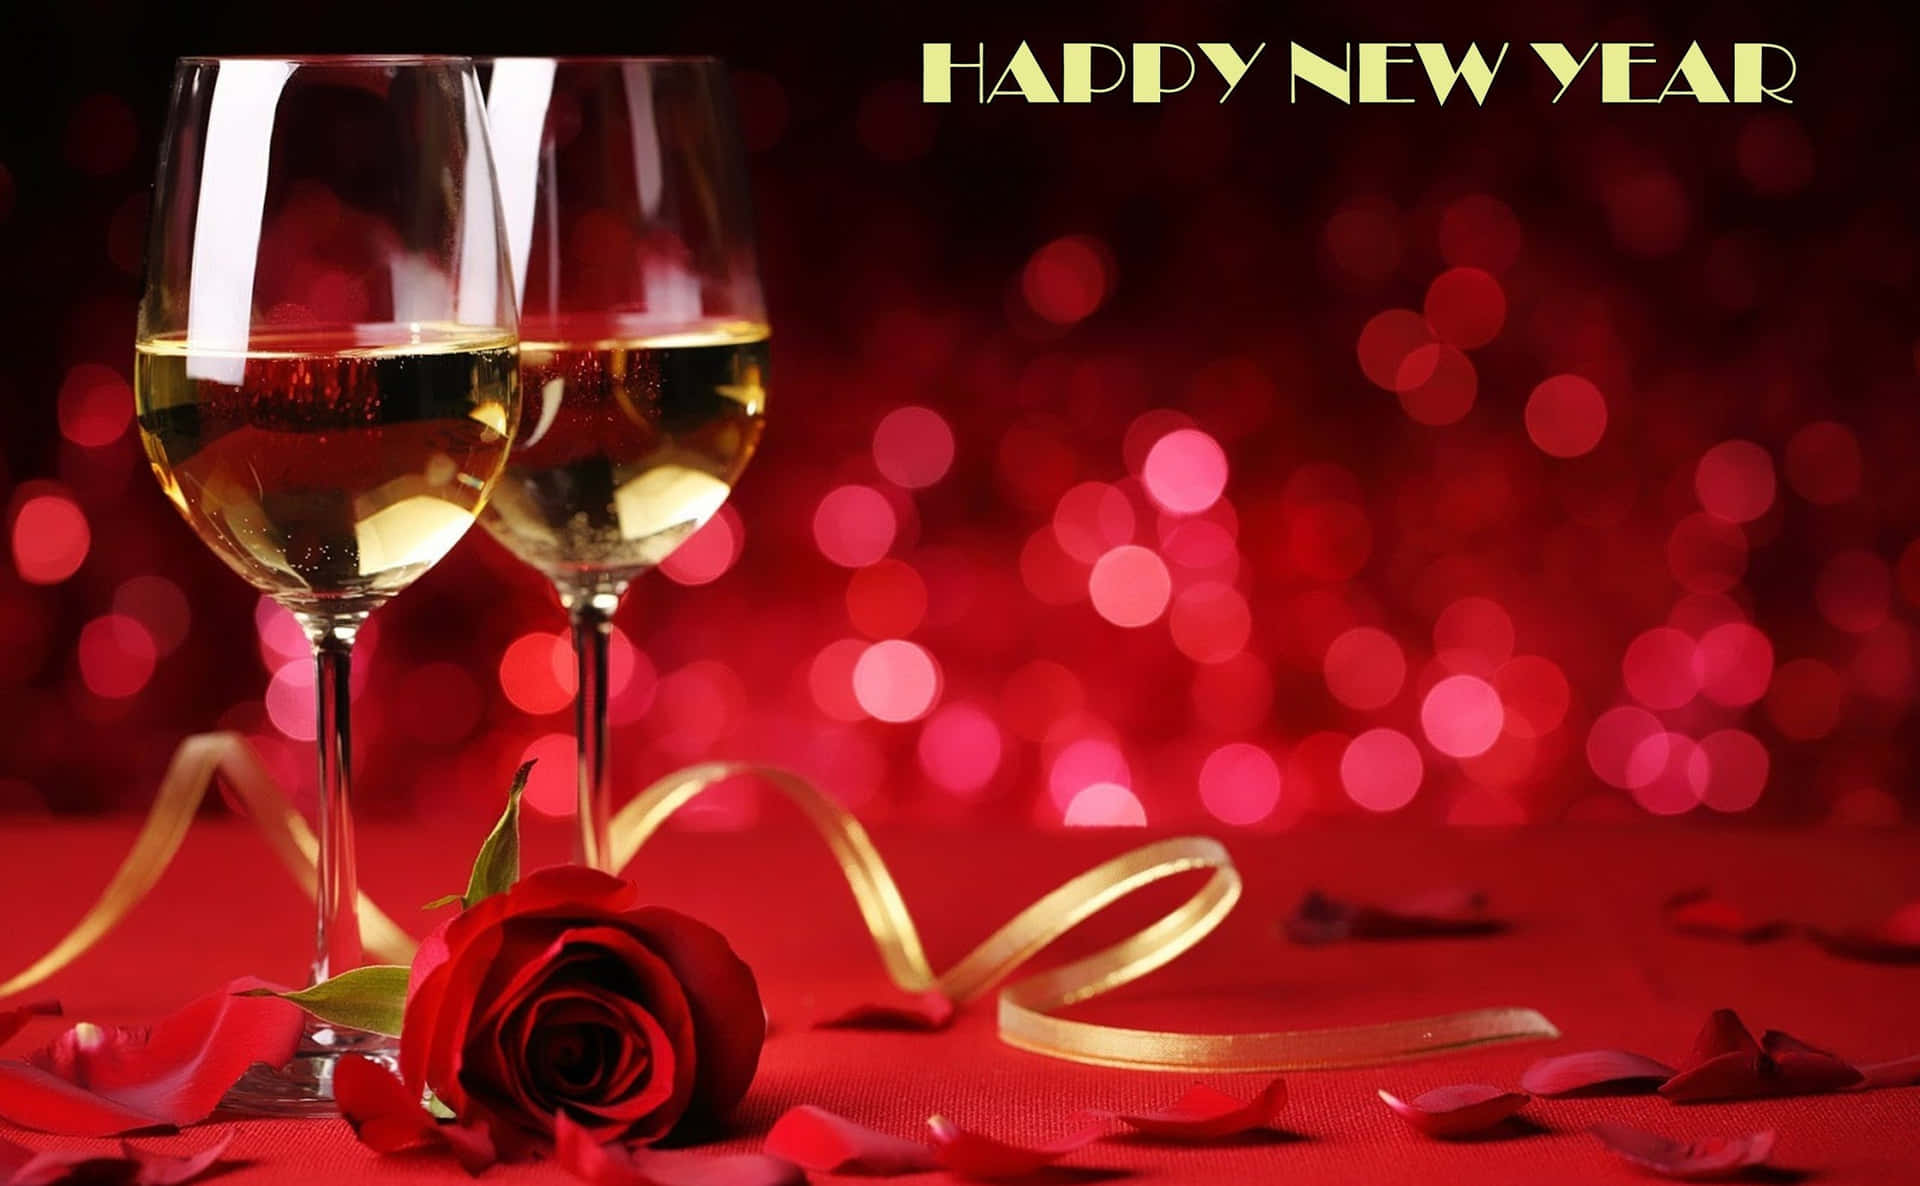 Celebrate the start of a brand New Year!